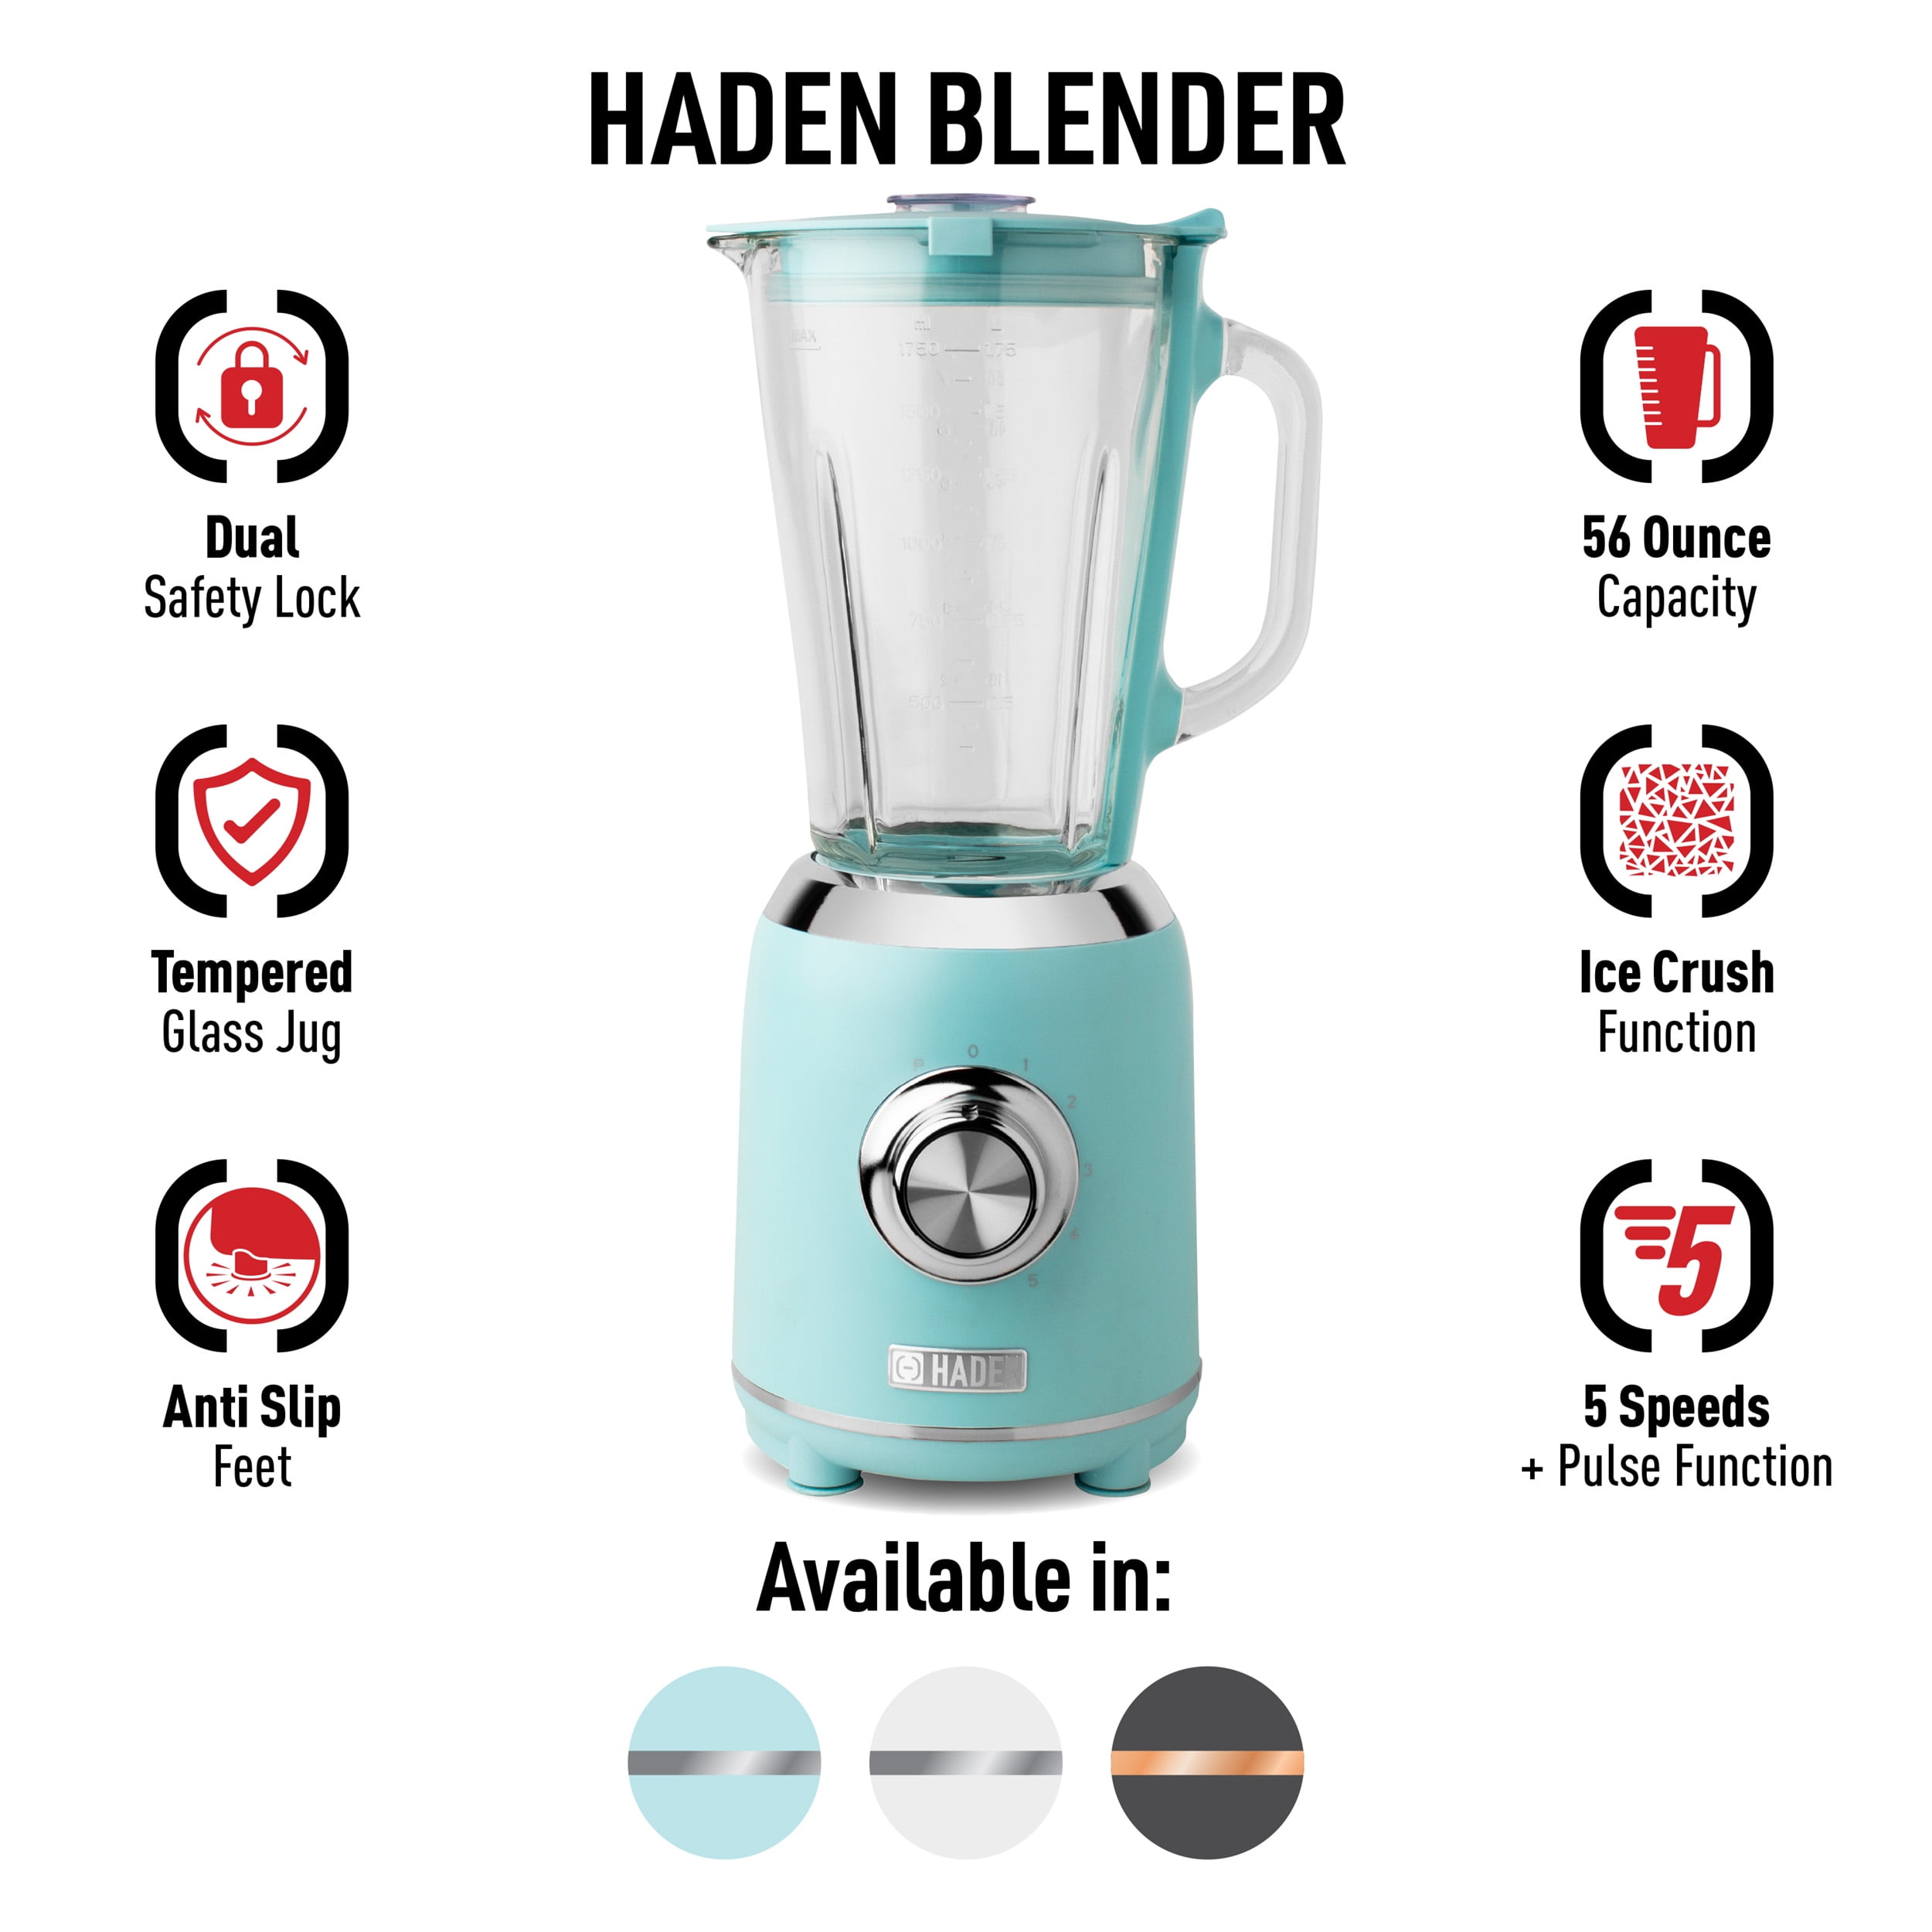 Haden Heritage 5-Speed Retro Blender with Glass Jar - Ivory White, 56 oz -  Foods Co.